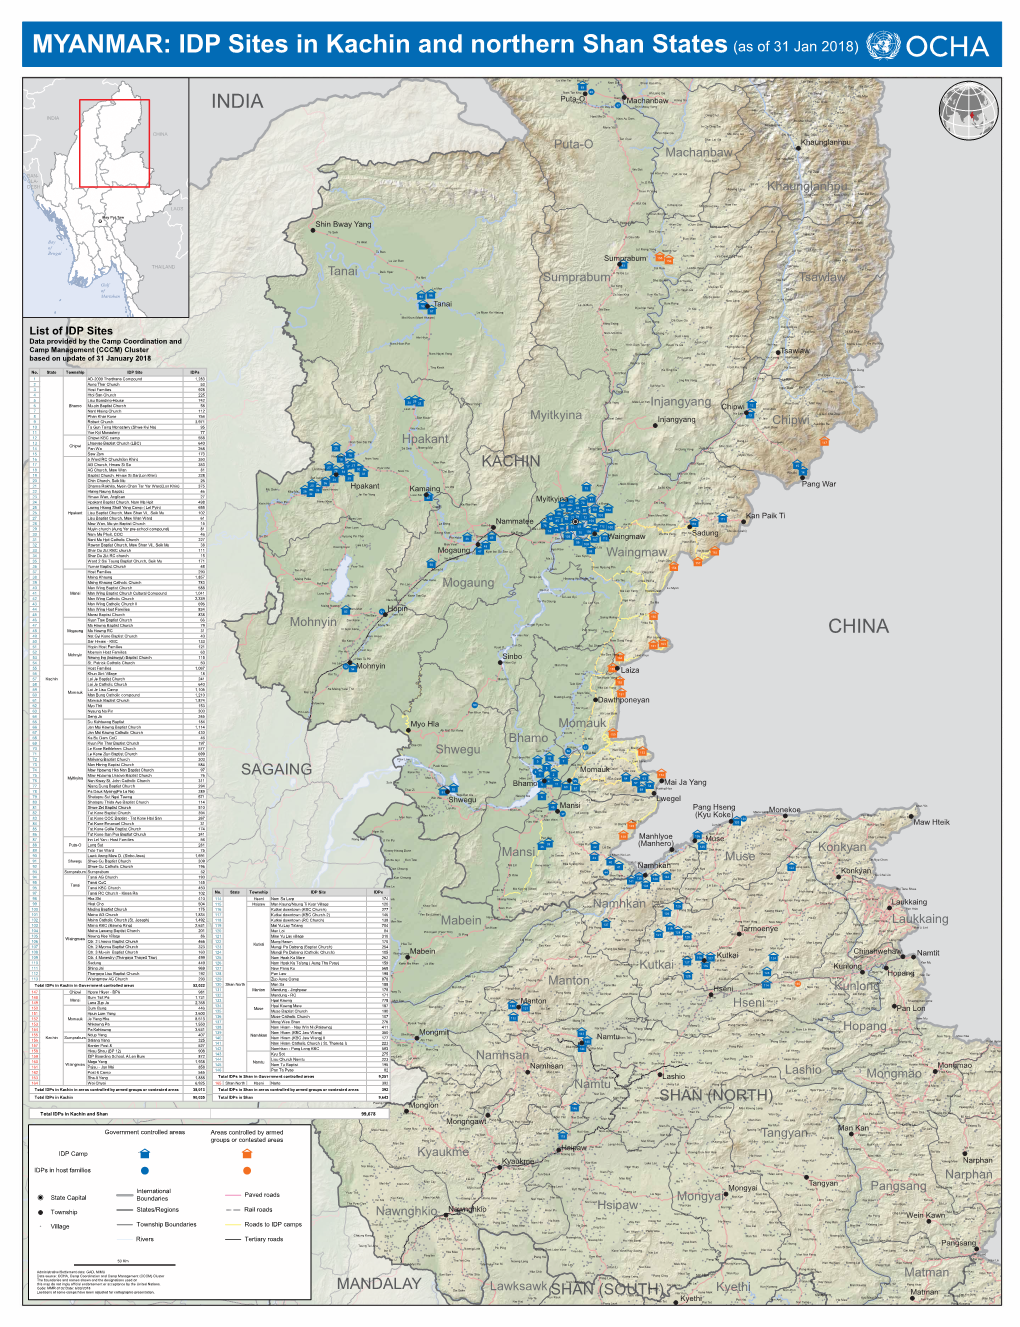 IDP Sites in Kachin and Northern Shan States(As of 31 Jan